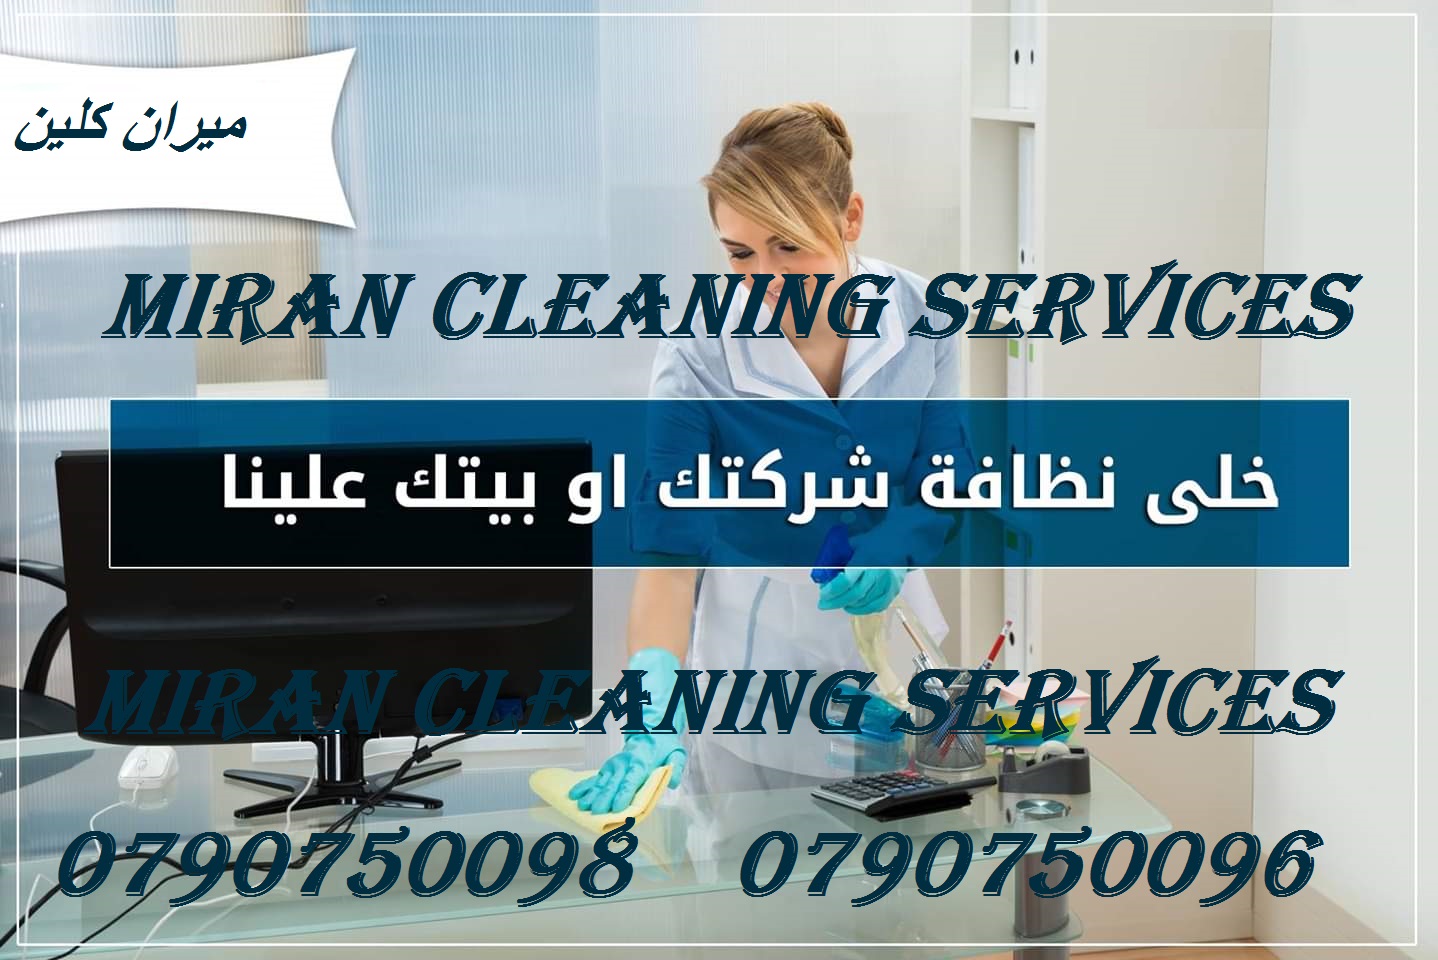 We provide Air Conditioning, General Maintenance and Duct Cleanings for Offices, Flats, Shops, Buildings & Villas at low cost. Call / WhatsApp 055-5269352 /-  عاملات لتنظيف وترتيب...